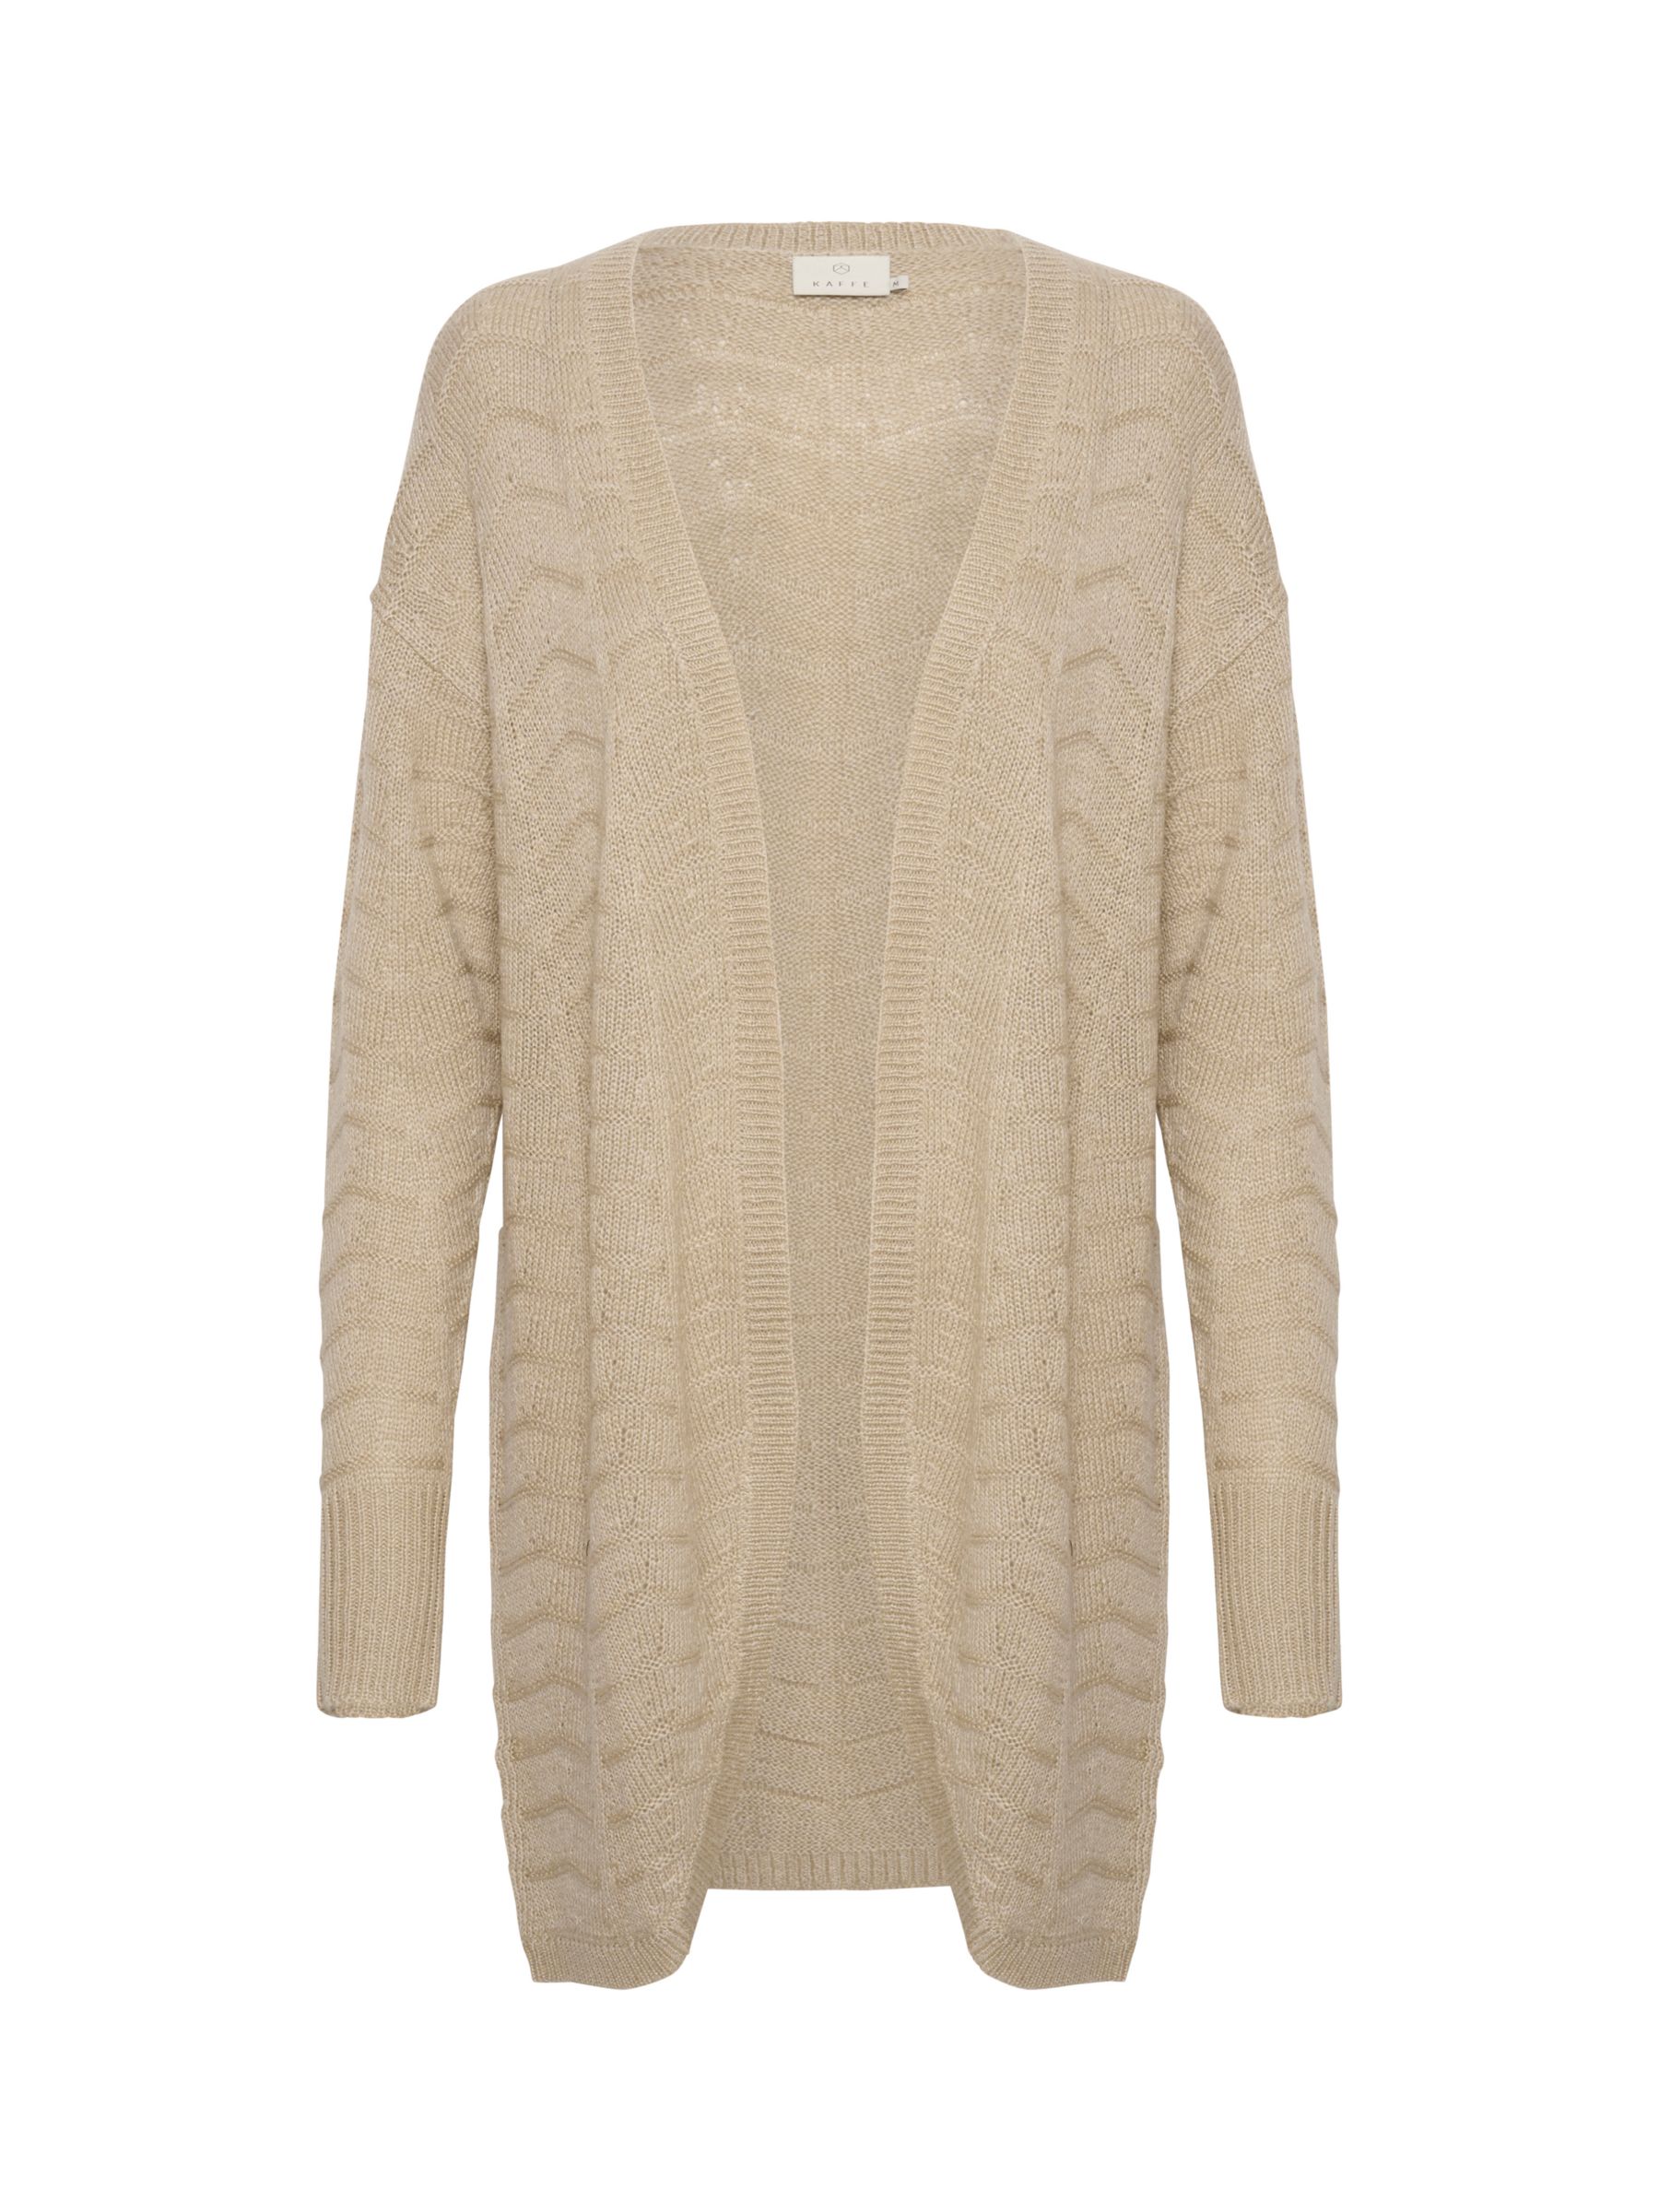 Buy KAFFE Emria Knit Cardigan, Feather Gray Online at johnlewis.com